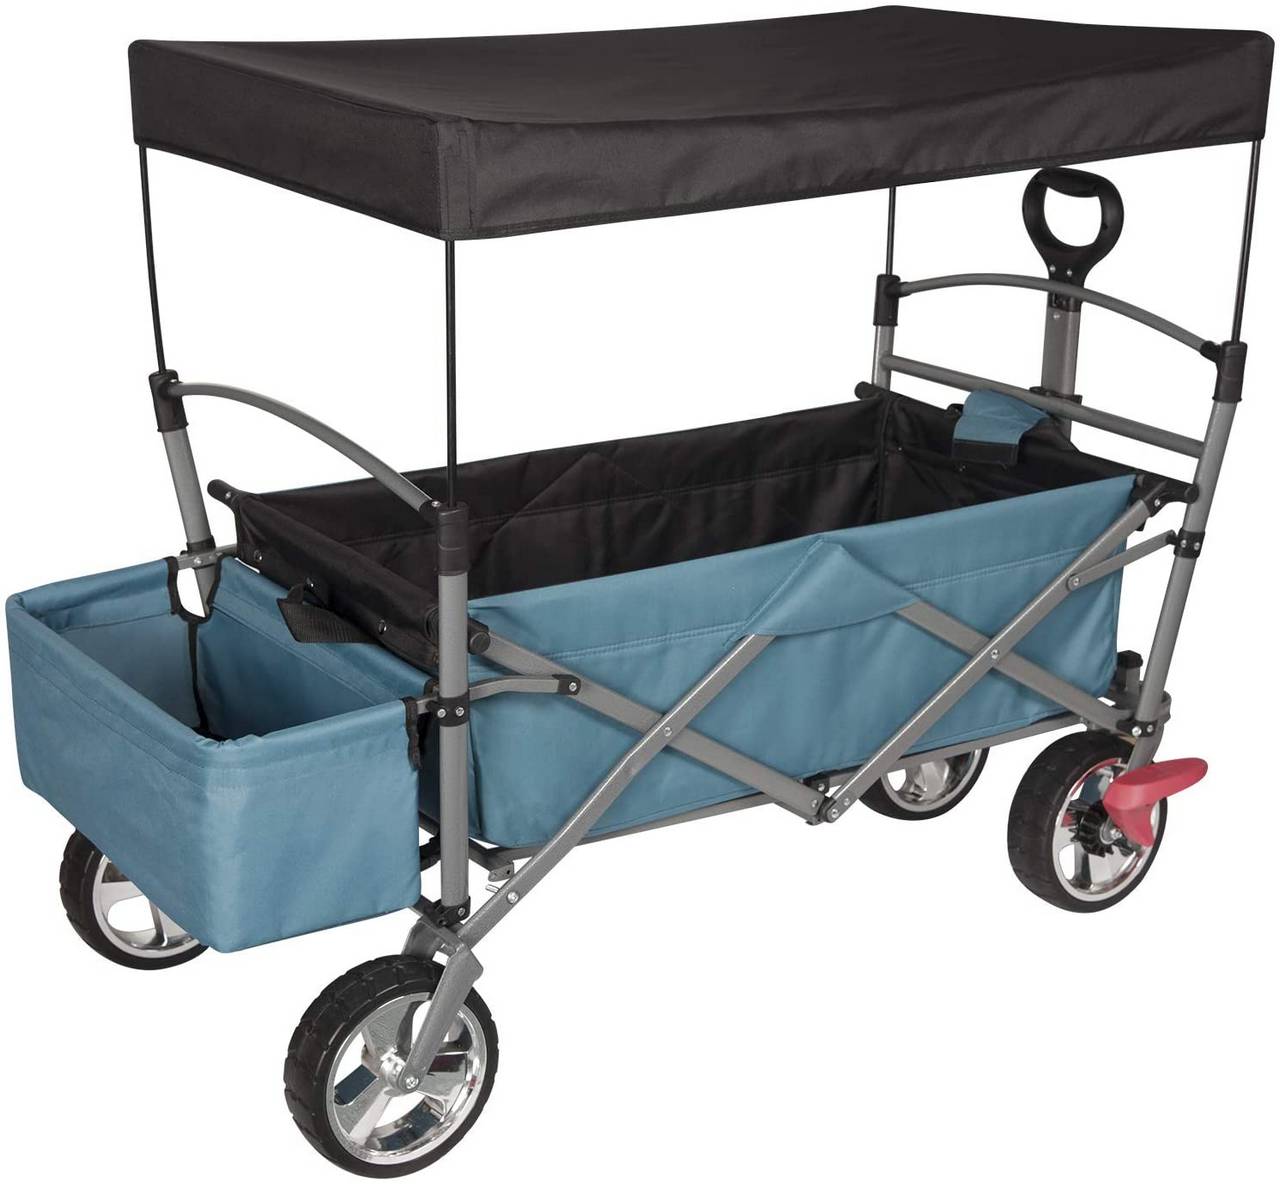 Foldable Garden Trolley Cart With Removable Canopy 4 Wheels And